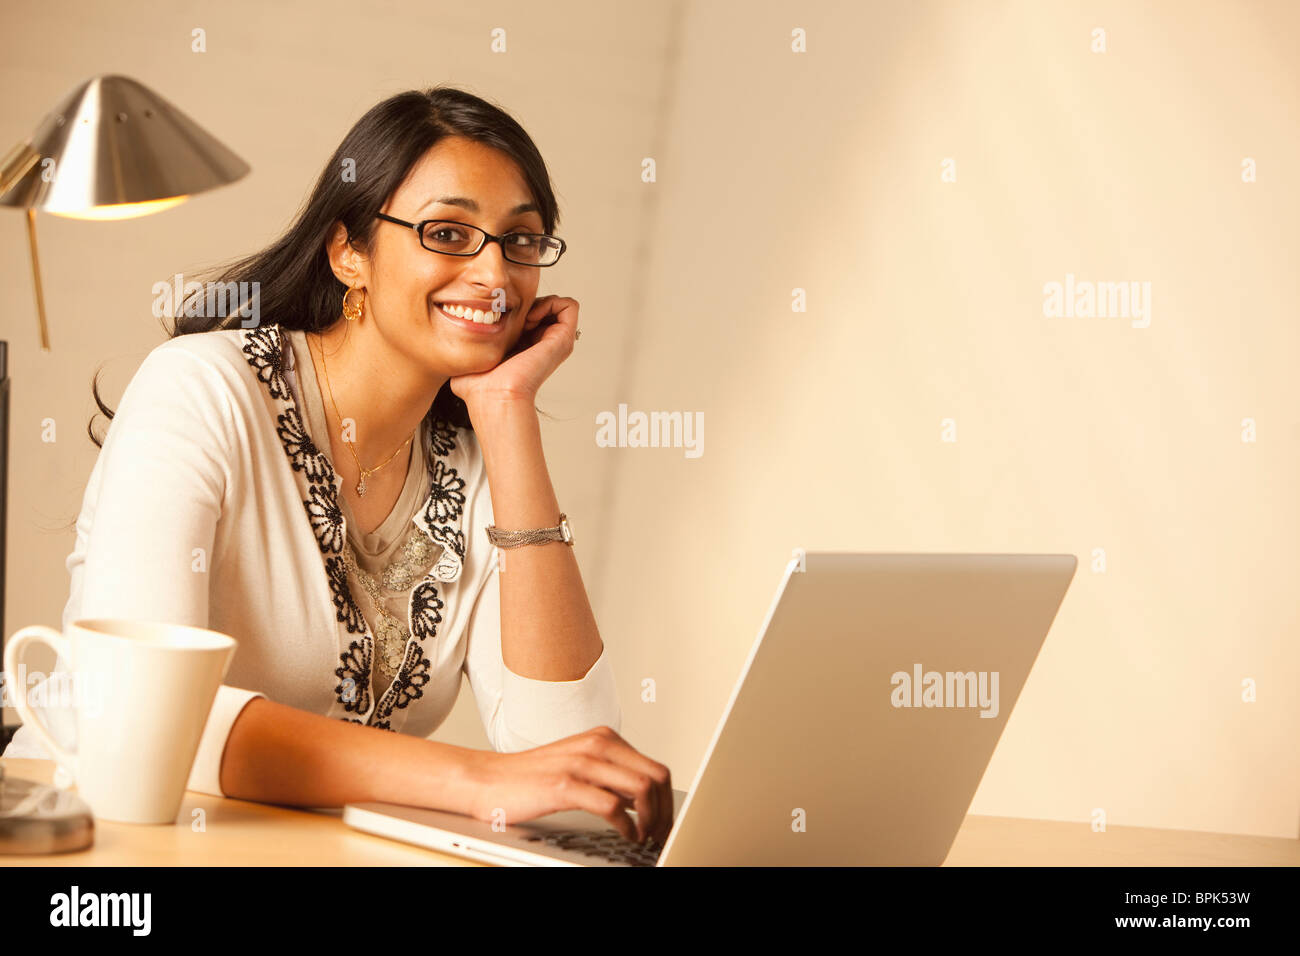 Mixed Race woman typing on laptop Banque D'Images